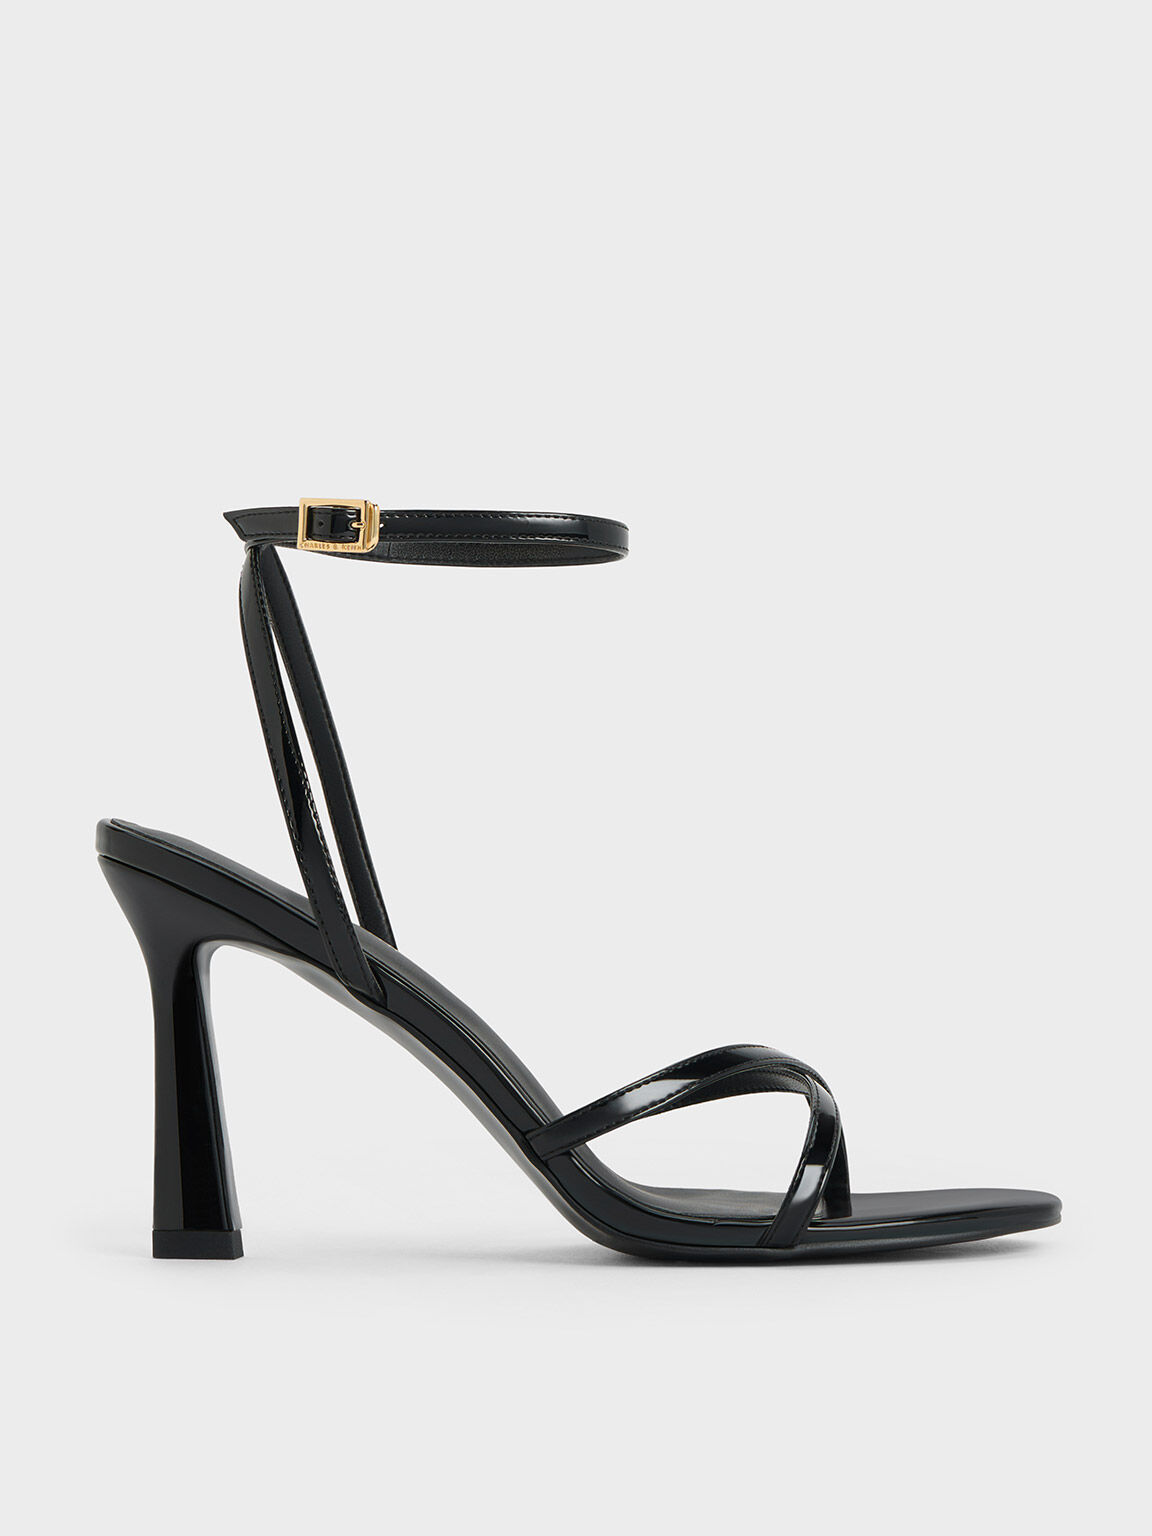 Rontic Shiny Stiletto Heels: Elegant Open Toe Black Heeled Sandals For  Women, US Plus Size 5 15 From Rontic, $43.22 | DHgate.Com